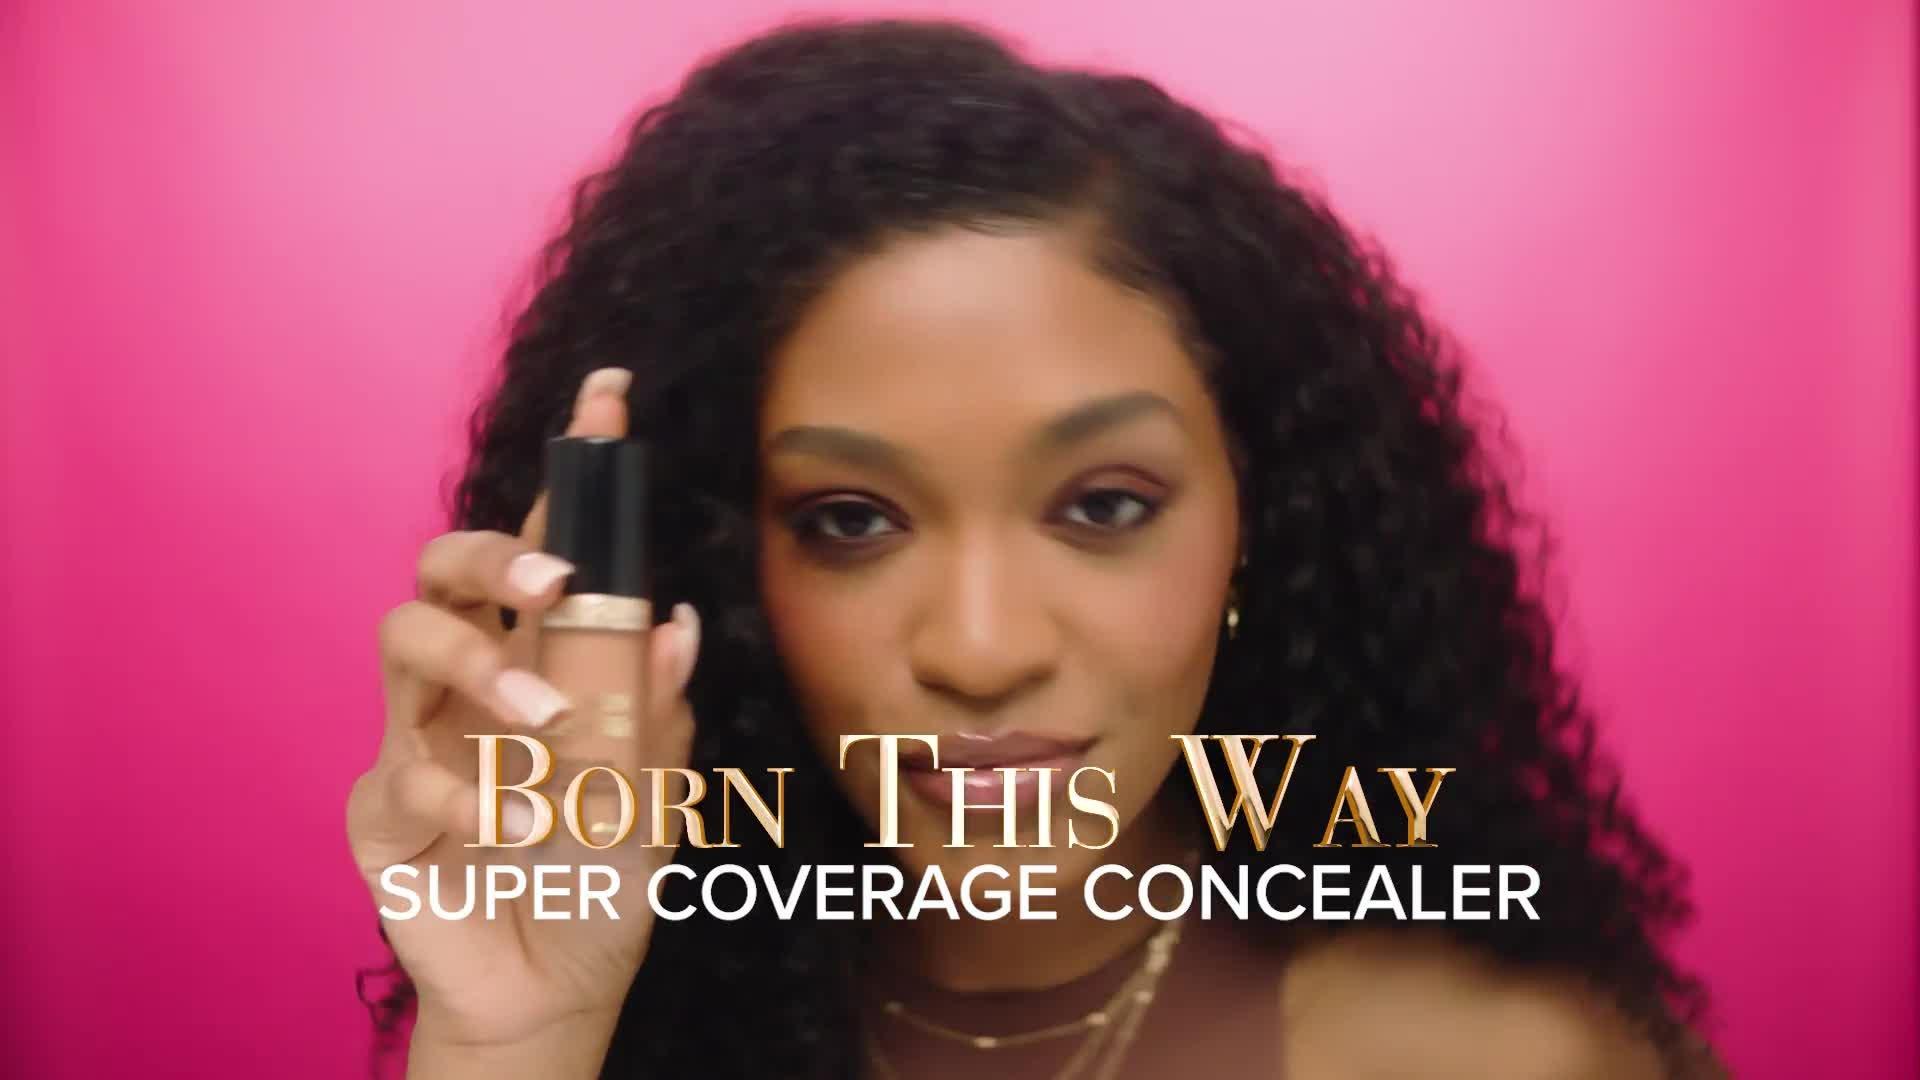 Born This Way Super Coverage Multi-Use Concealer - Too Faced